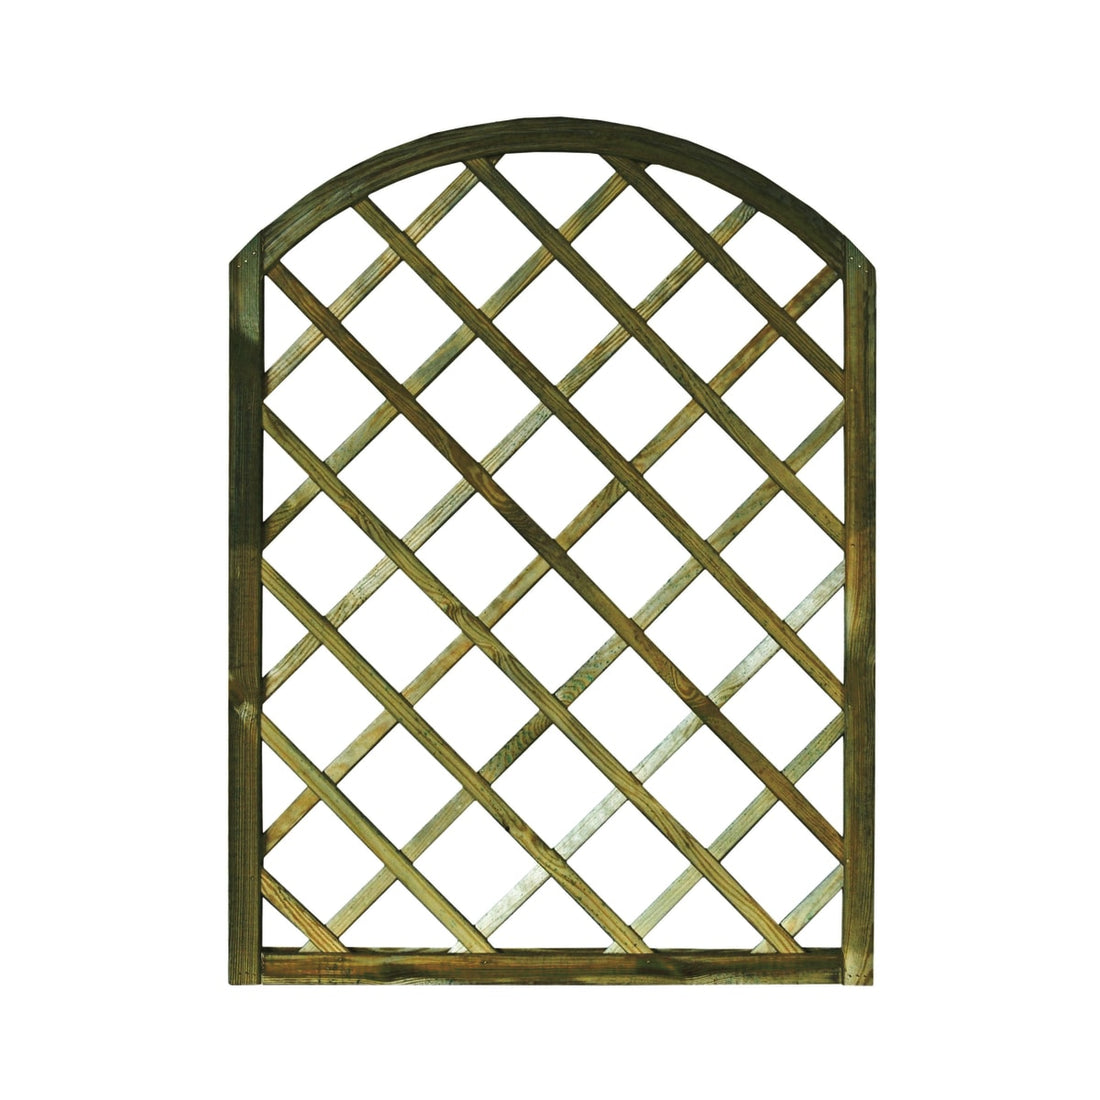 DIAGO ARCH GRATING 90 X 120 CM IN AUTOCLAVE-TREATED PINE WOOD